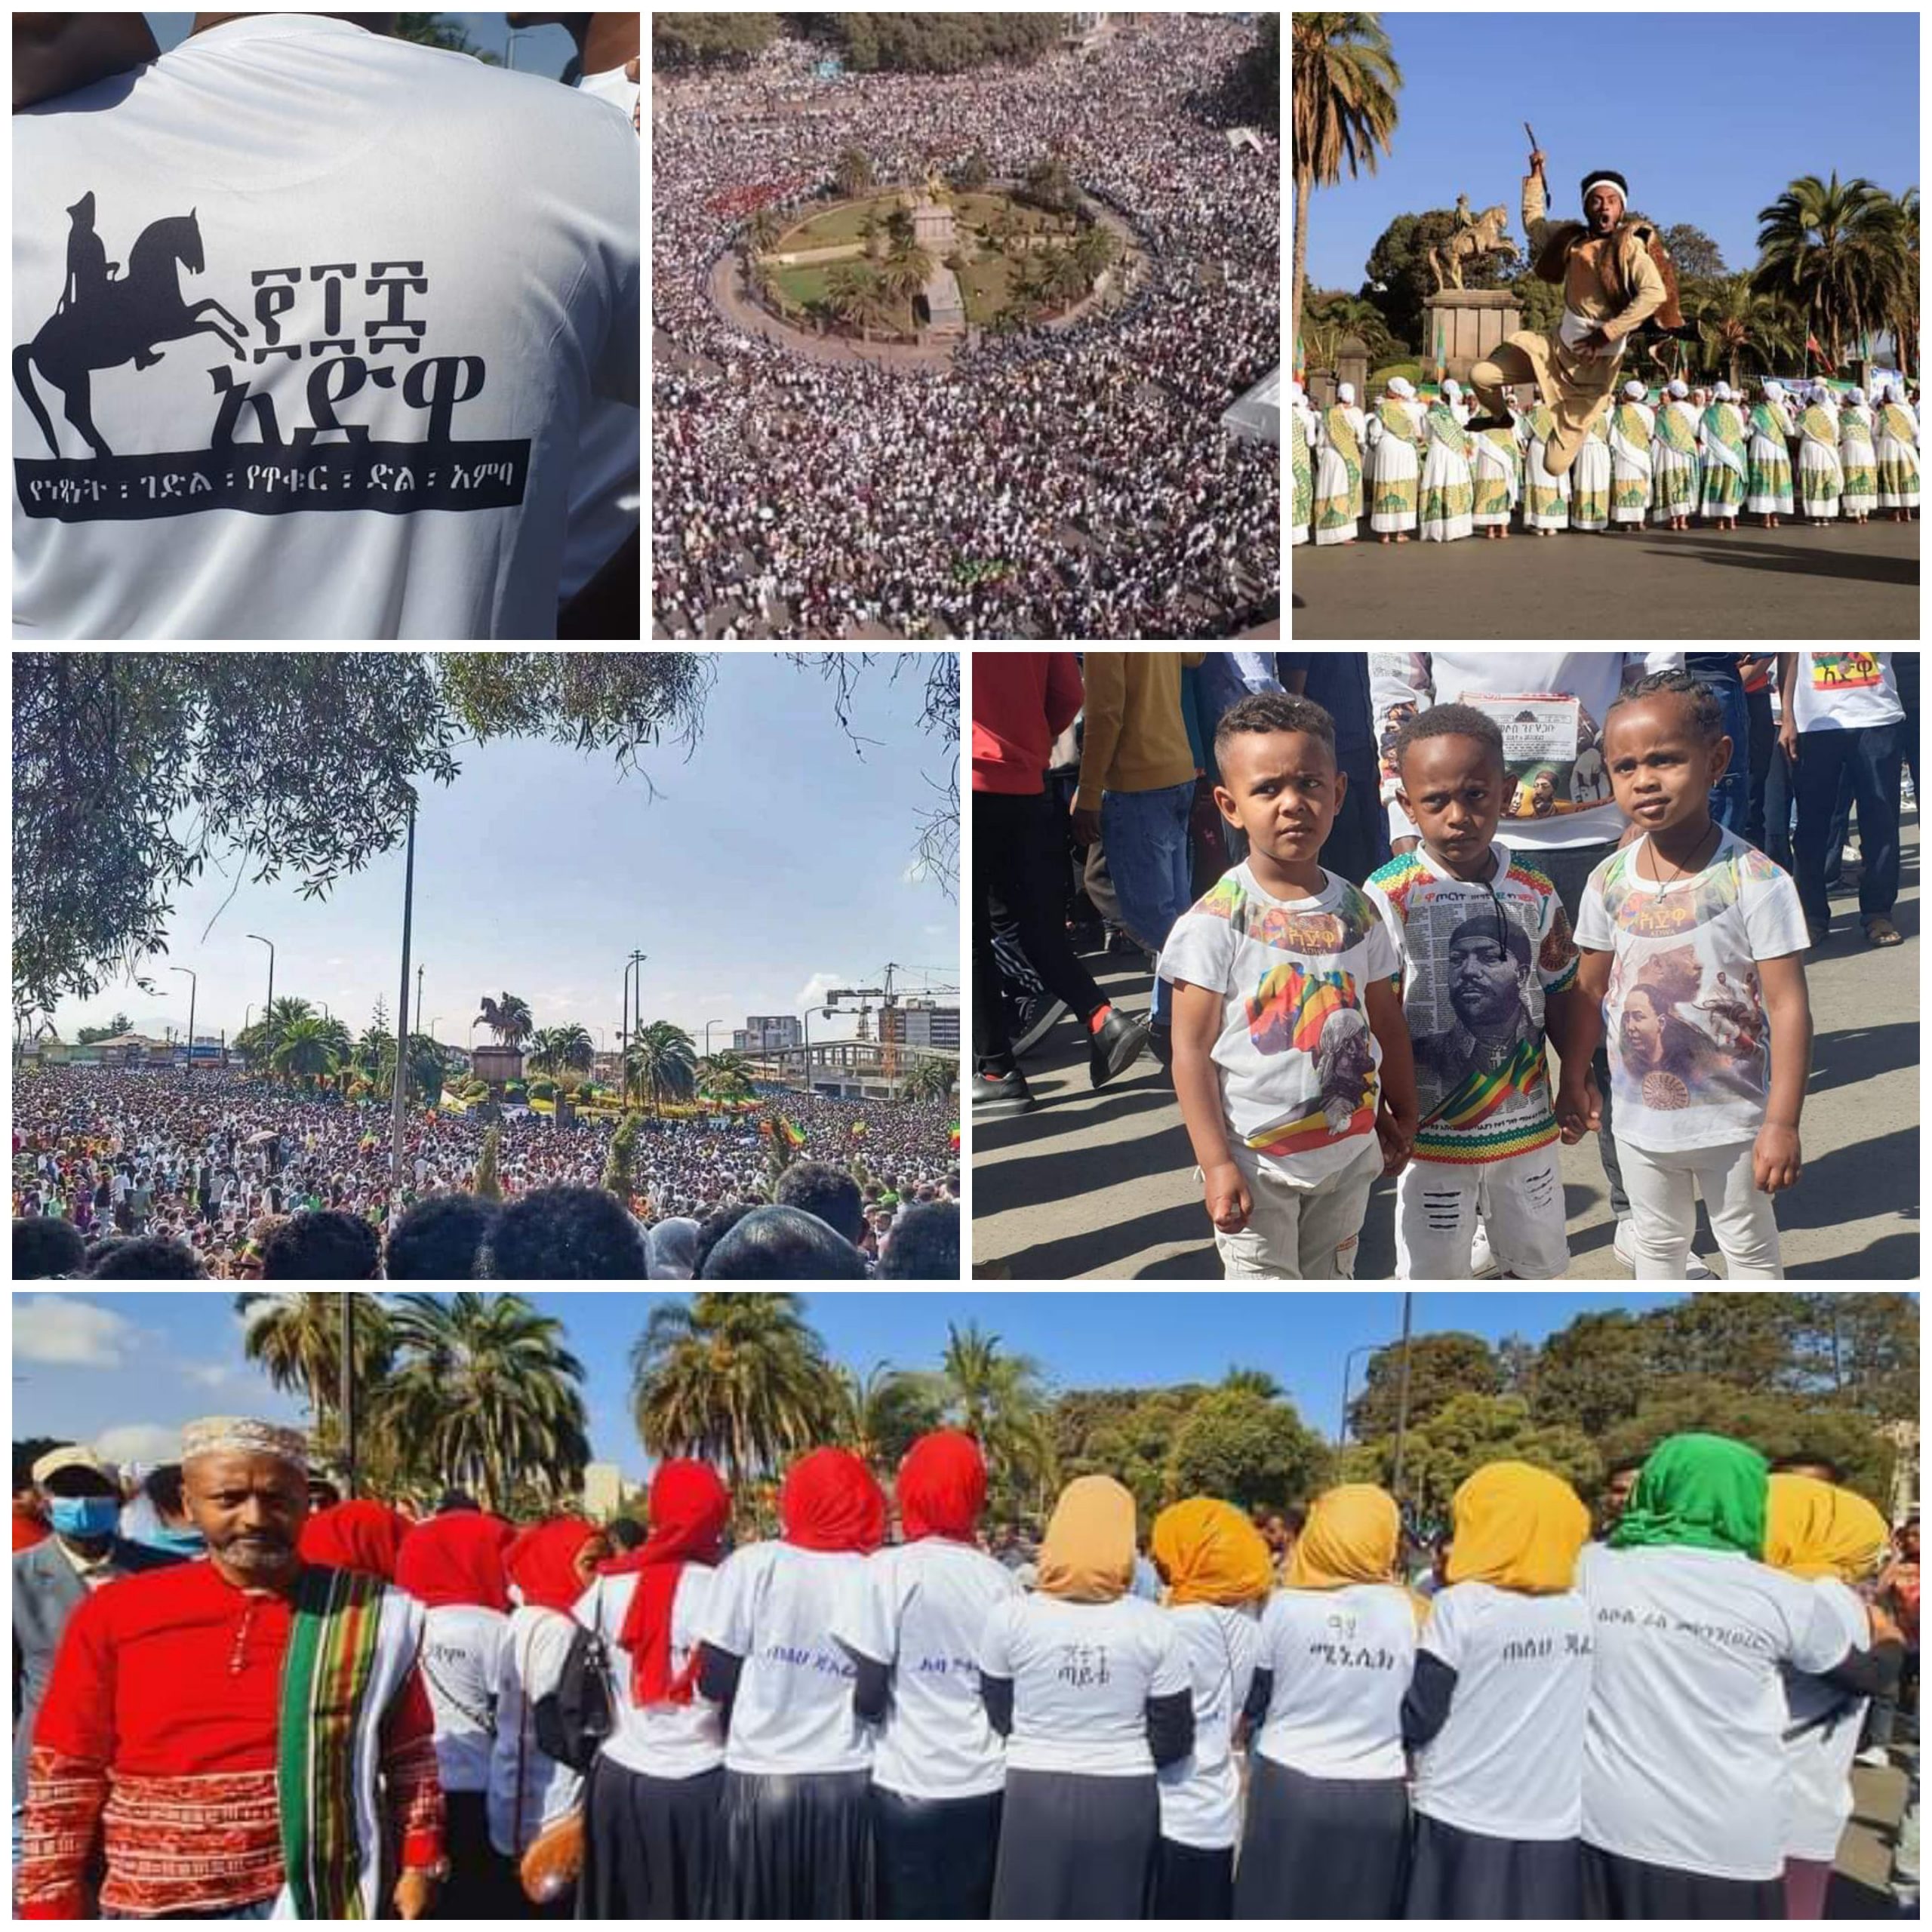 Ethiopians Celebrate The Victory of Adwa